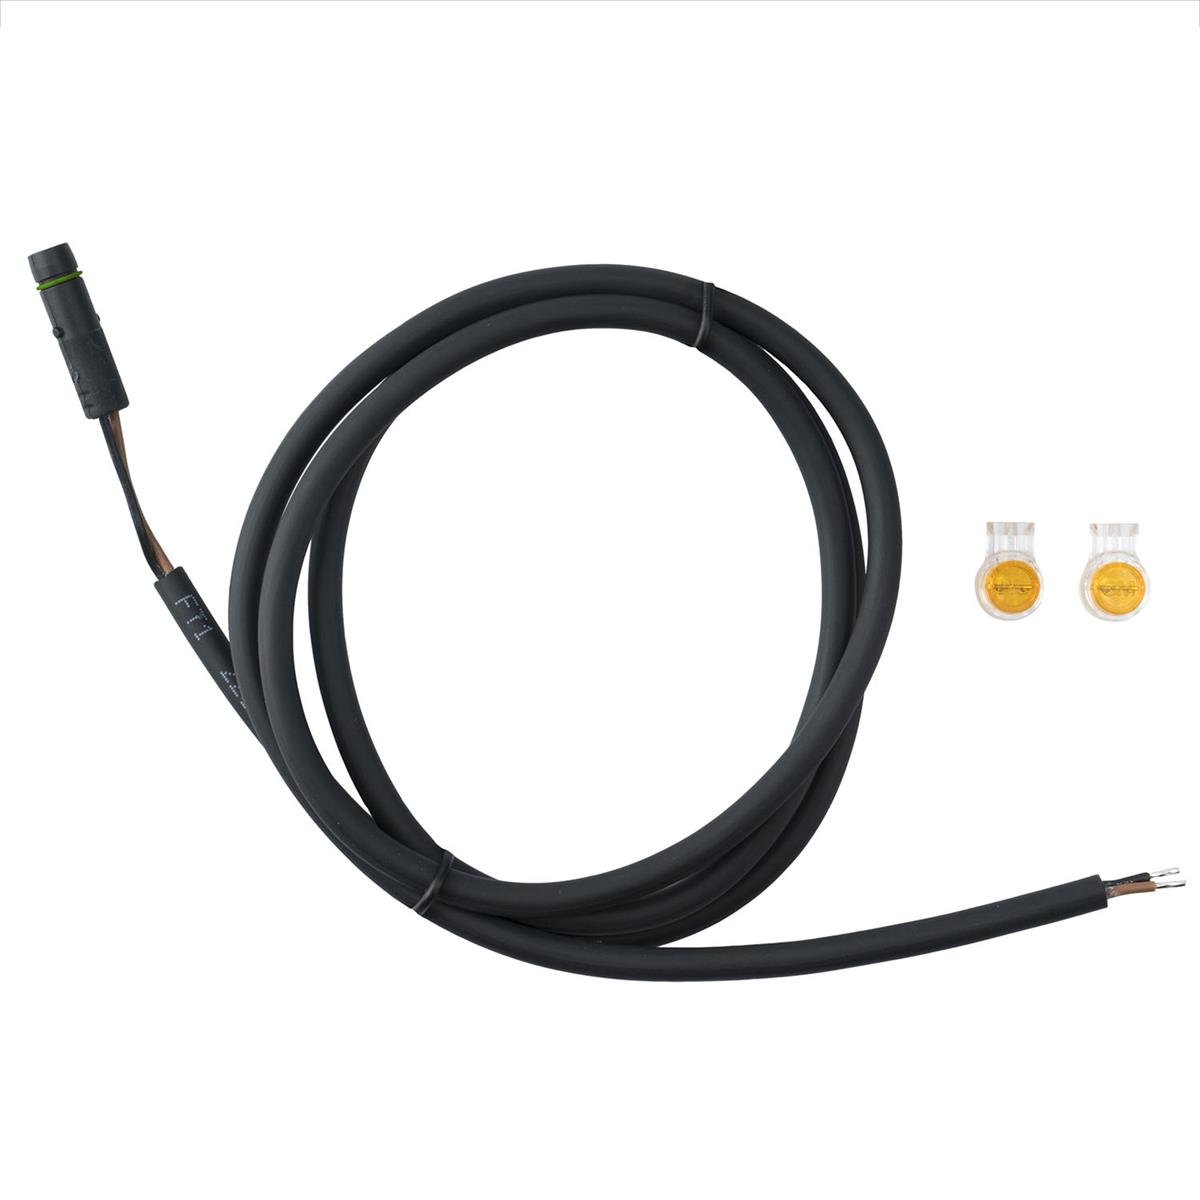 Supernova Frontlight Connection Cable  for Brose